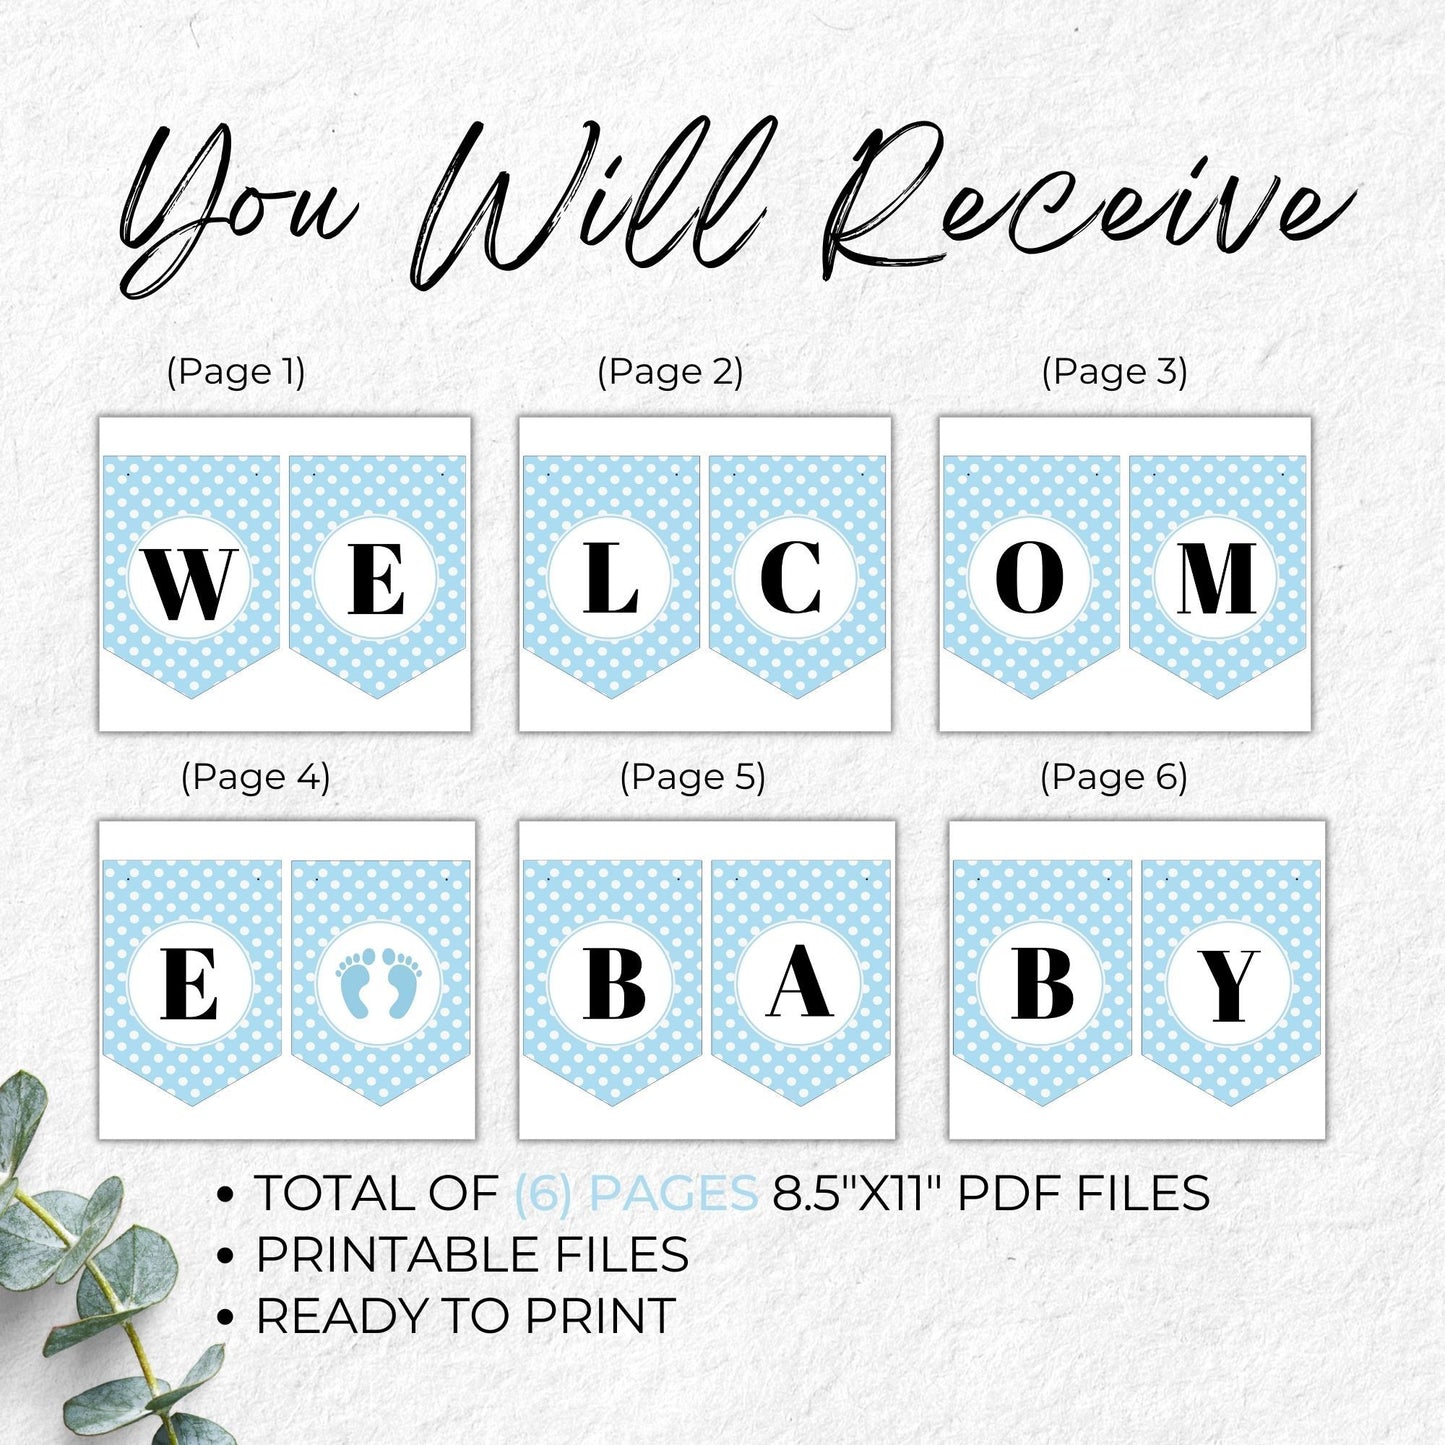 Blue Polka Dots Printable Welcome Baby Banner